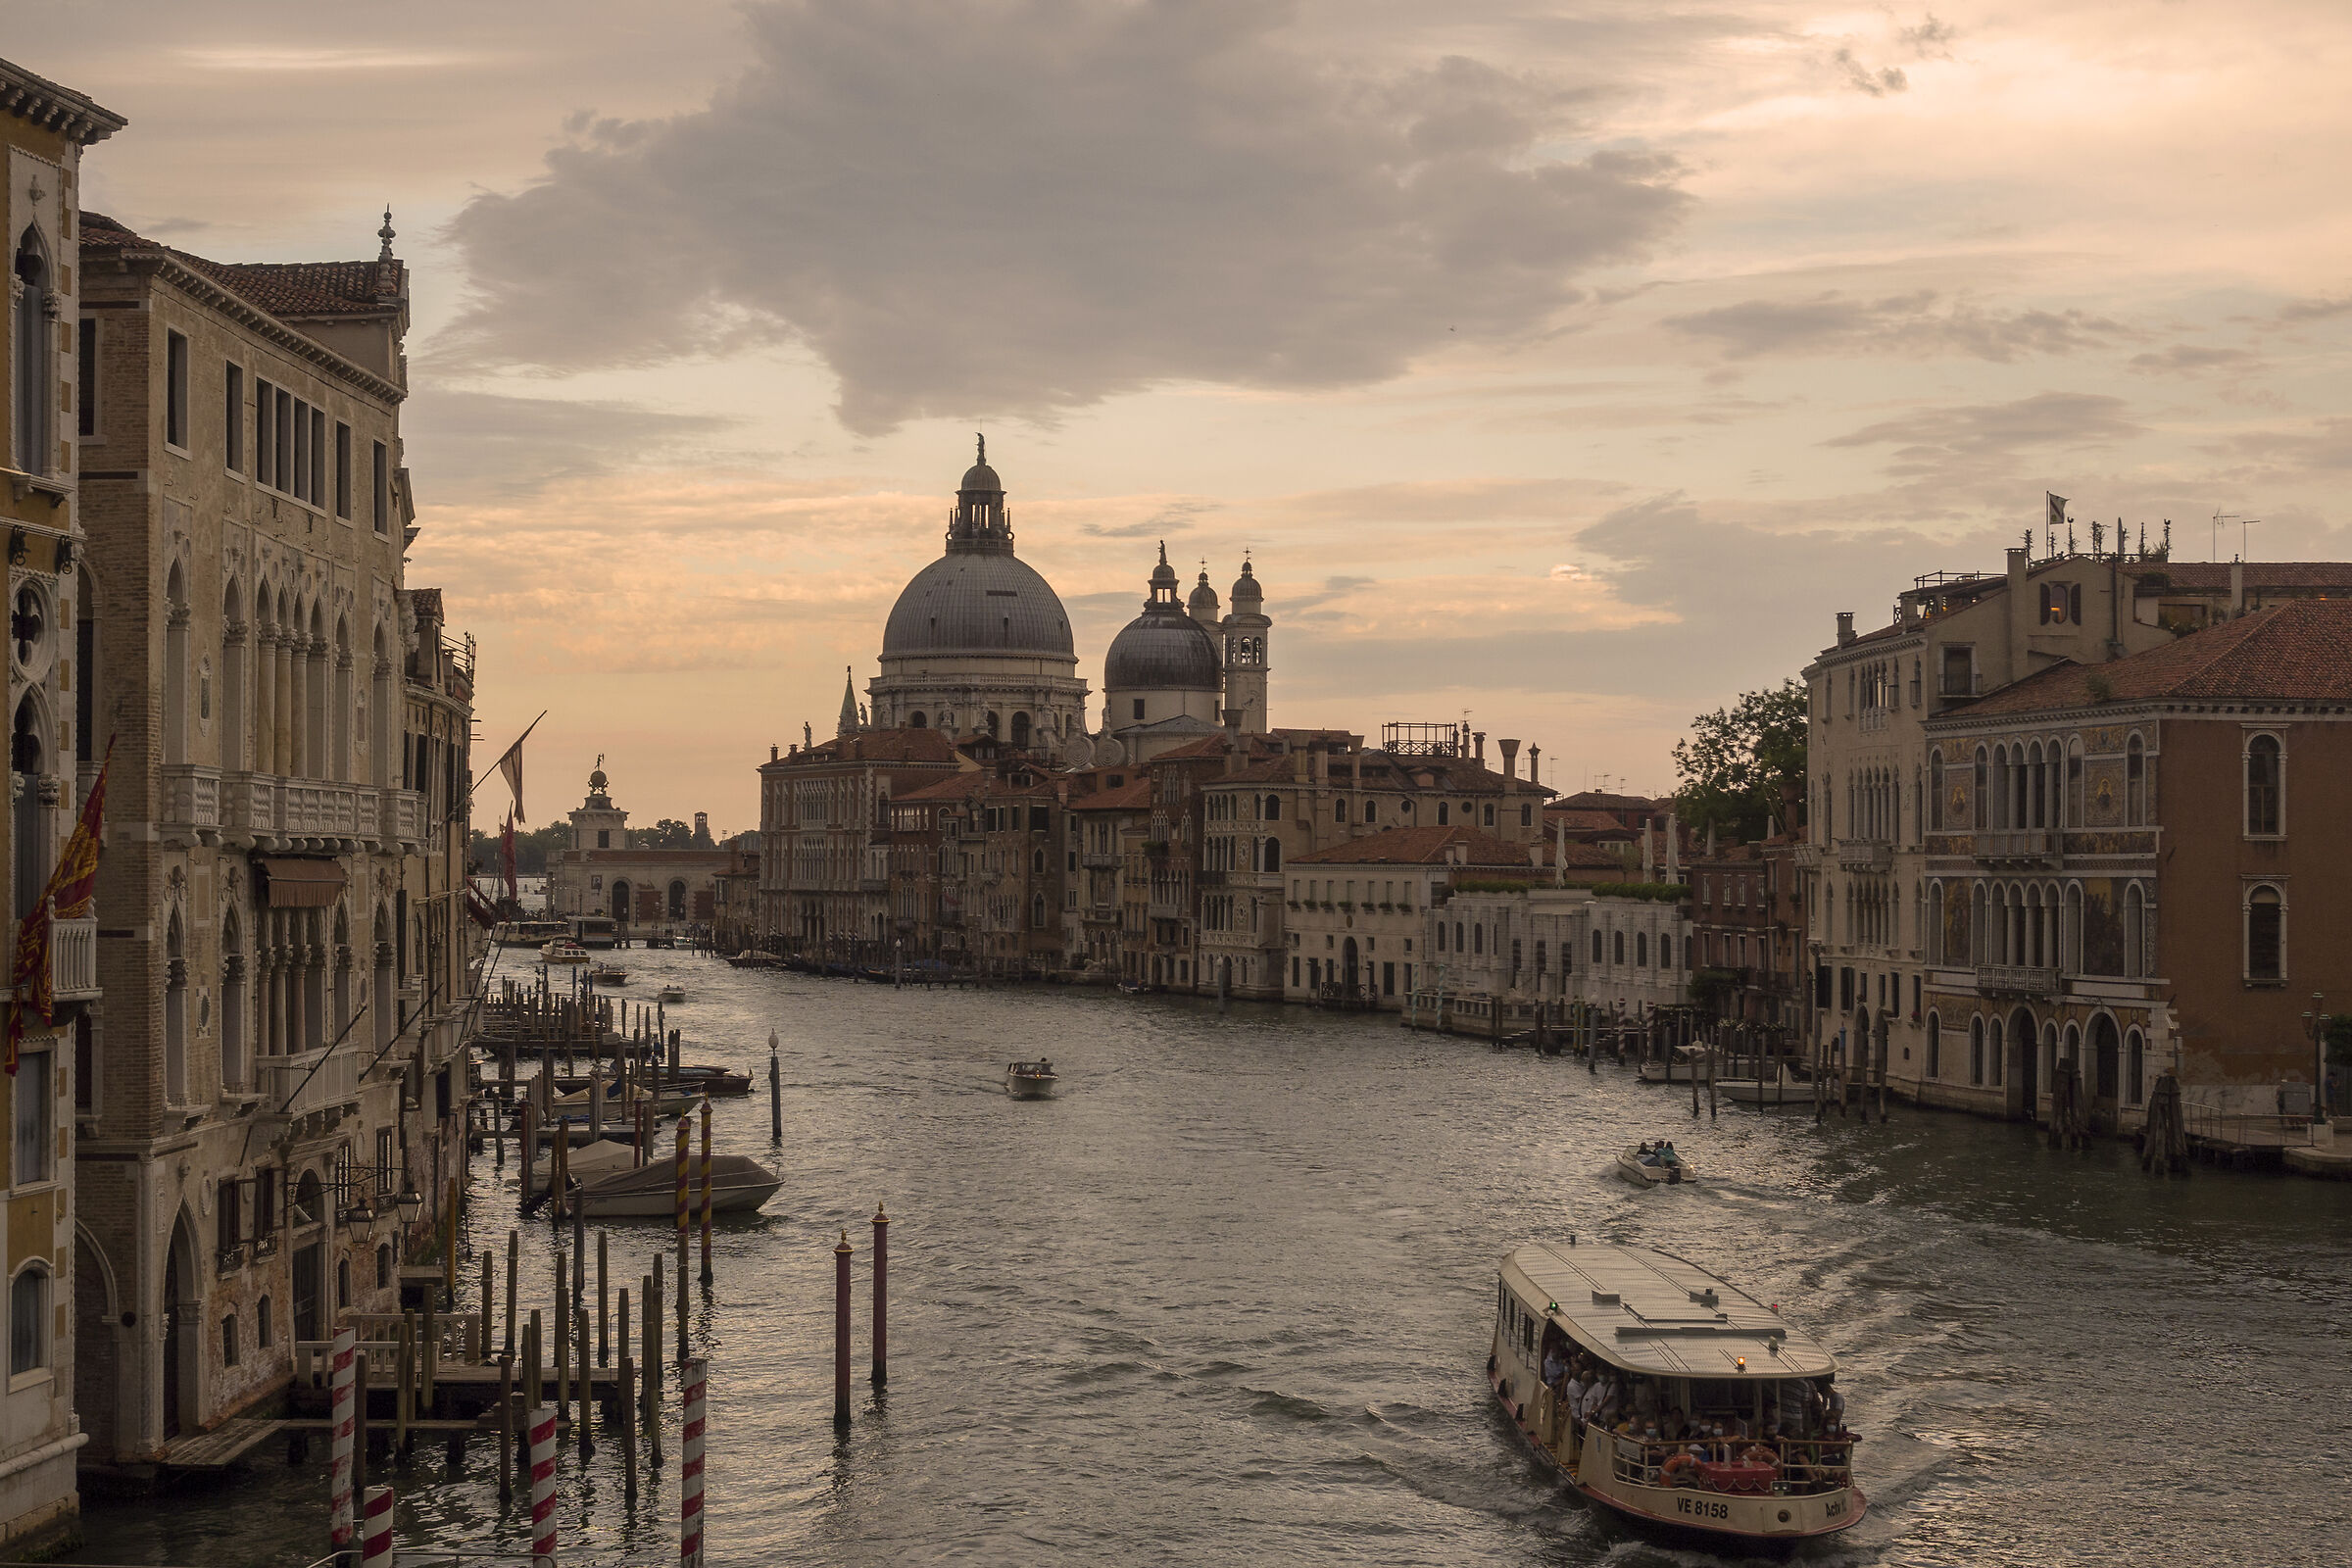 Venice in the evening...